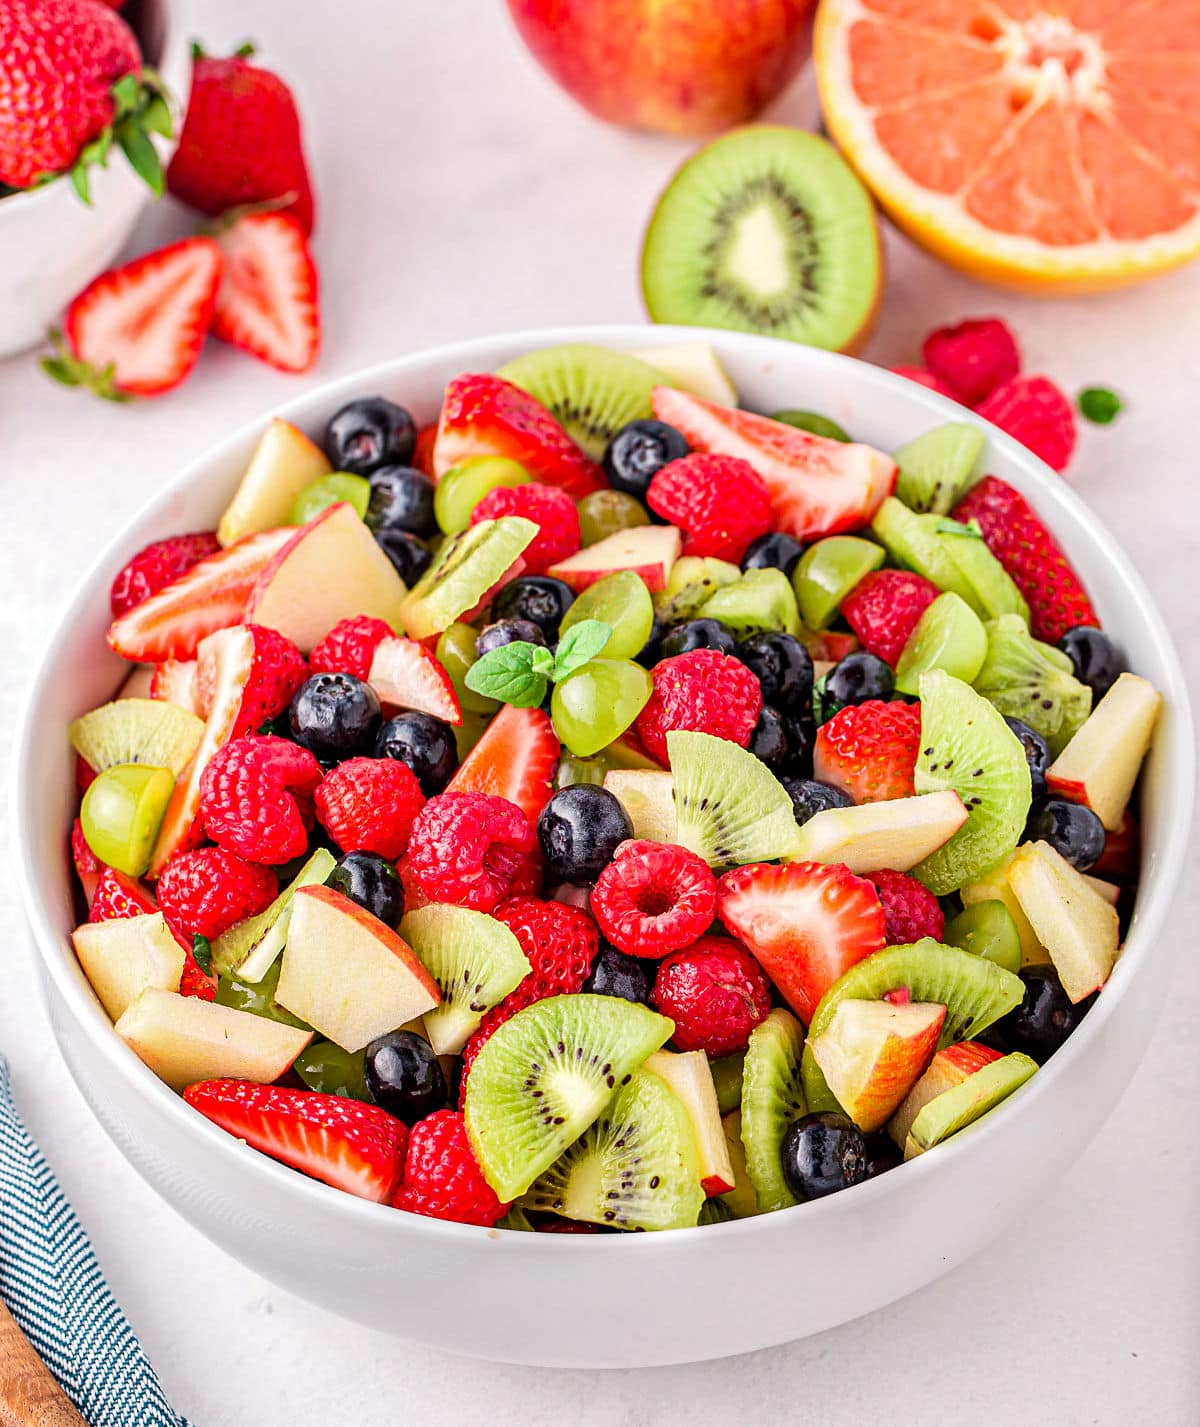 beautiful vibrantly colored fruit salad in white serving bowl. raspberries, kiwis, apples, blueberries and strawberries.